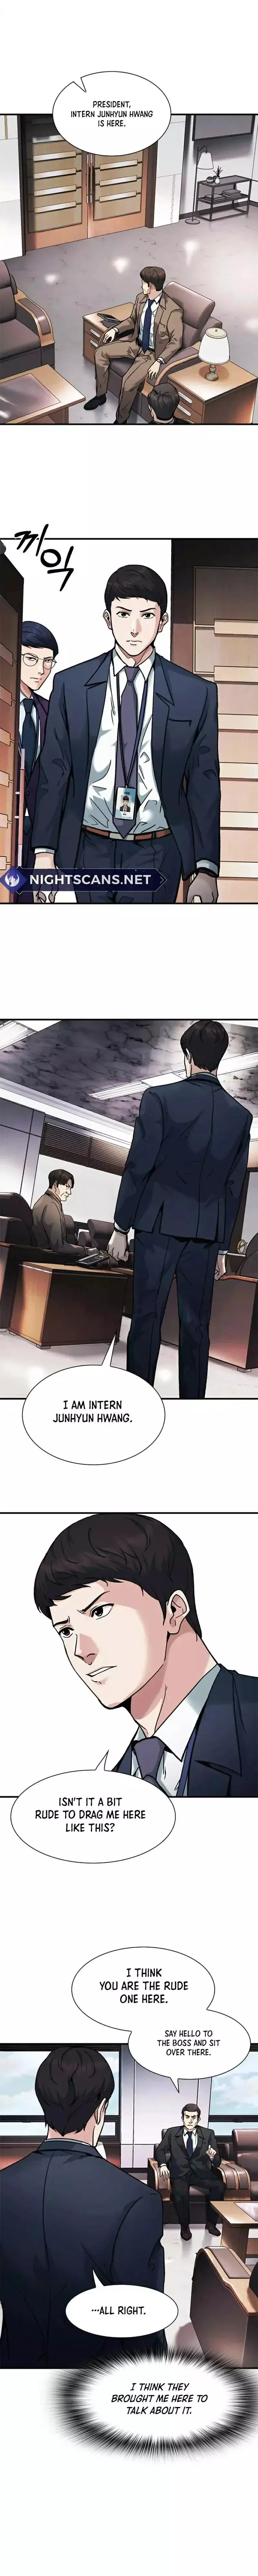 Chairman Kang, The New Employee - 11 page 4-993ad14f